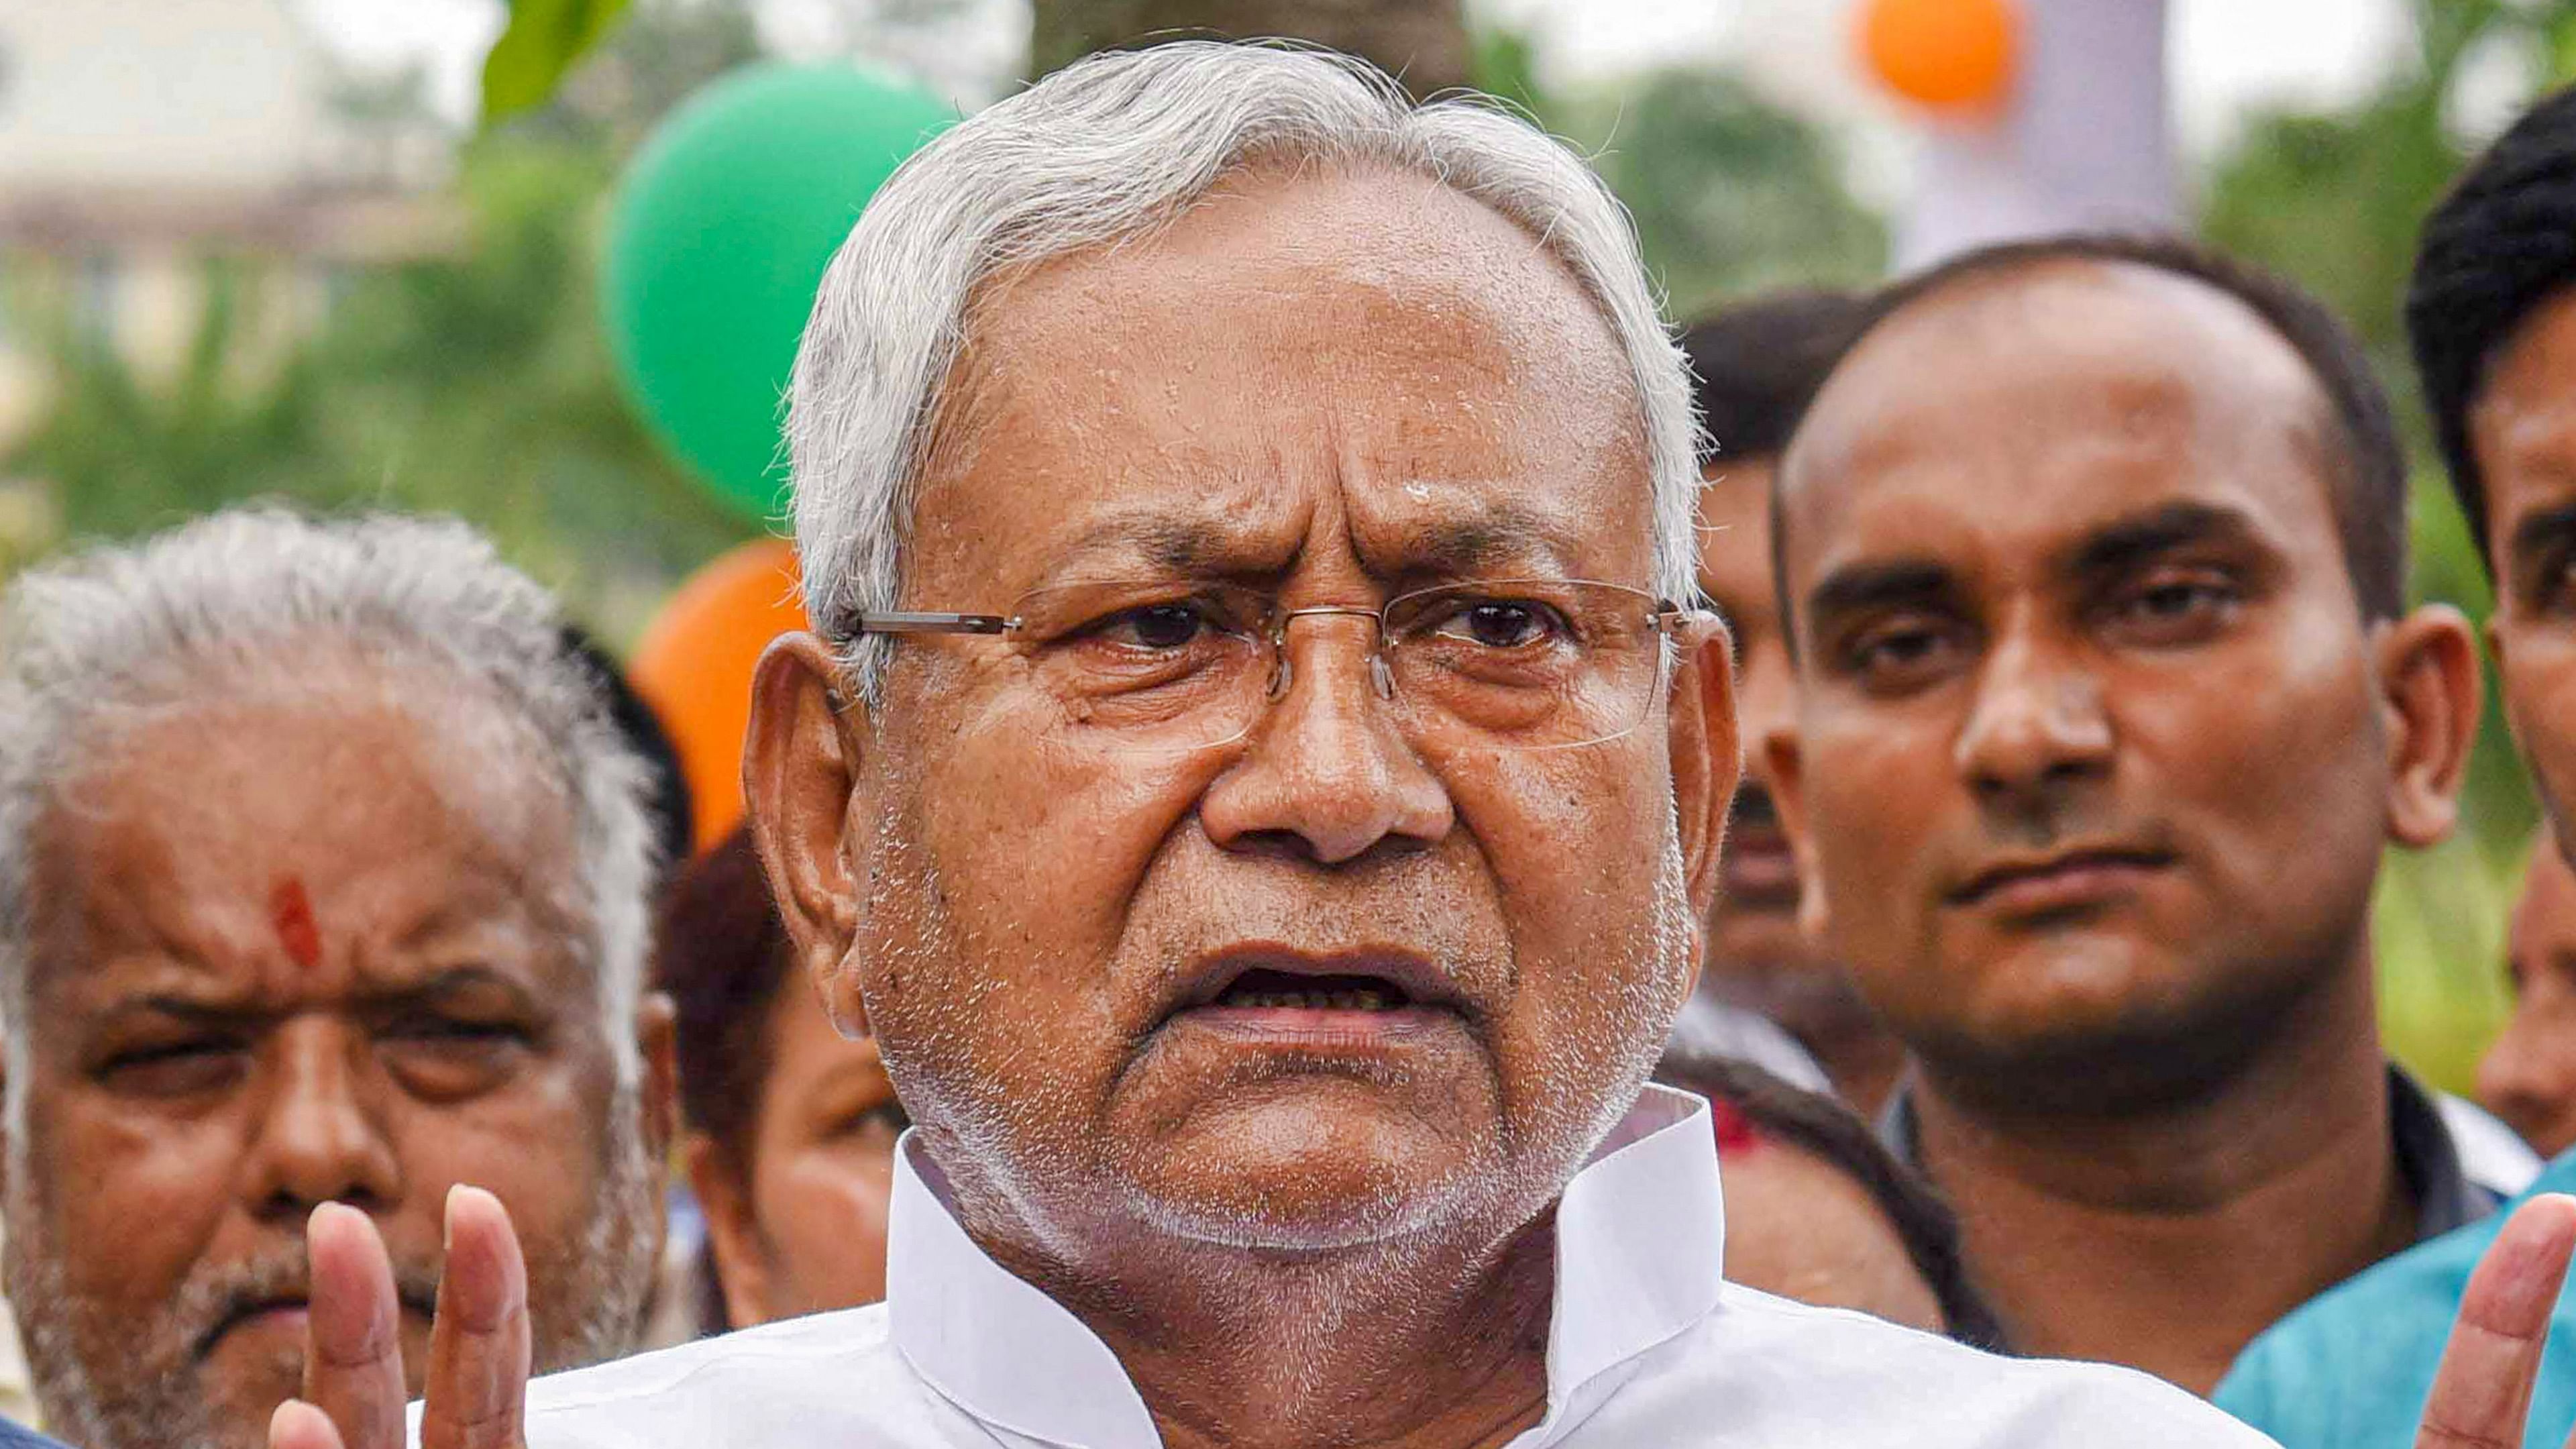 Chief Minister Nitish Kumar has expressed his intention to work for a united opposition to take on the BJP's hegemony. Credit: PTI Photo